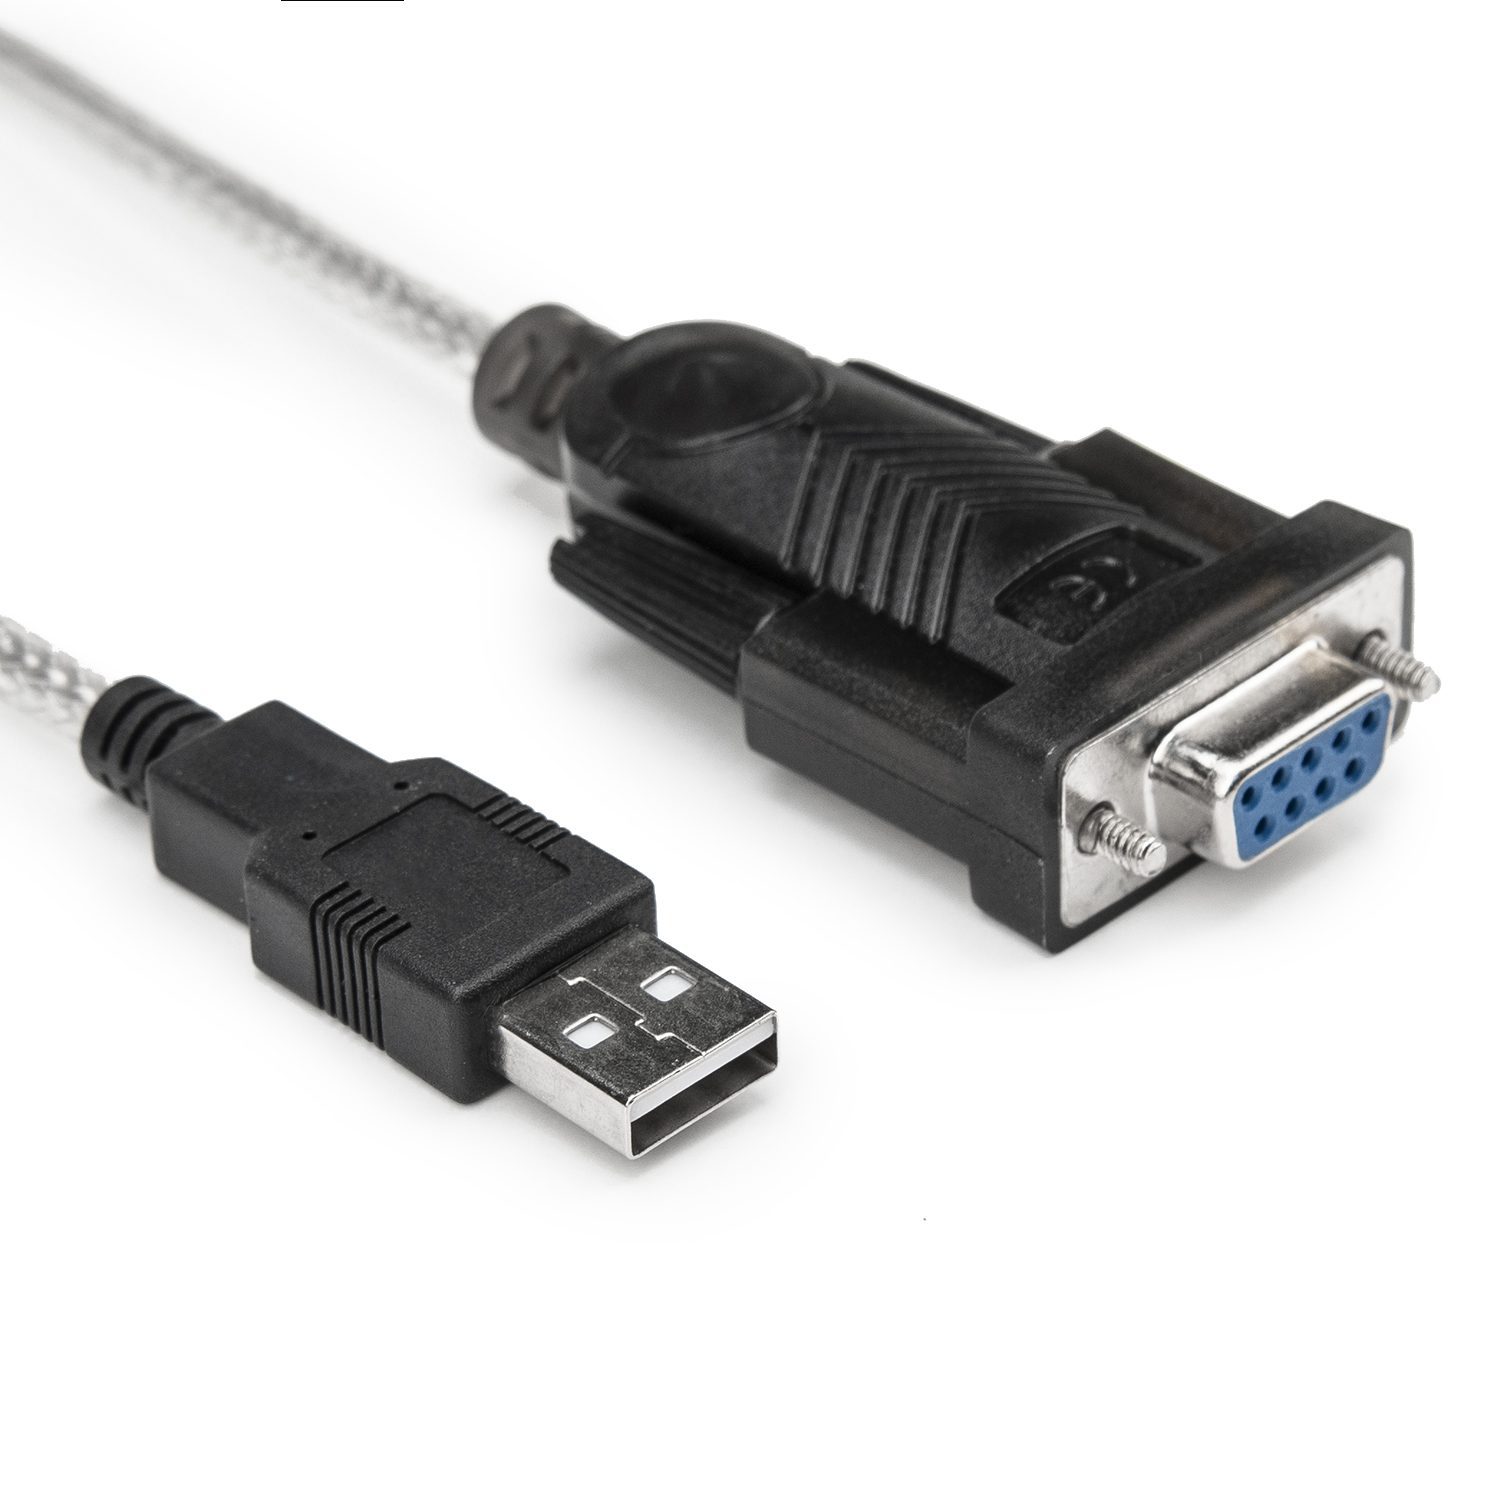 Premium 5ft 1 USB to Null Modem RS232 DB9 Serial Adapter Cable with FTDI